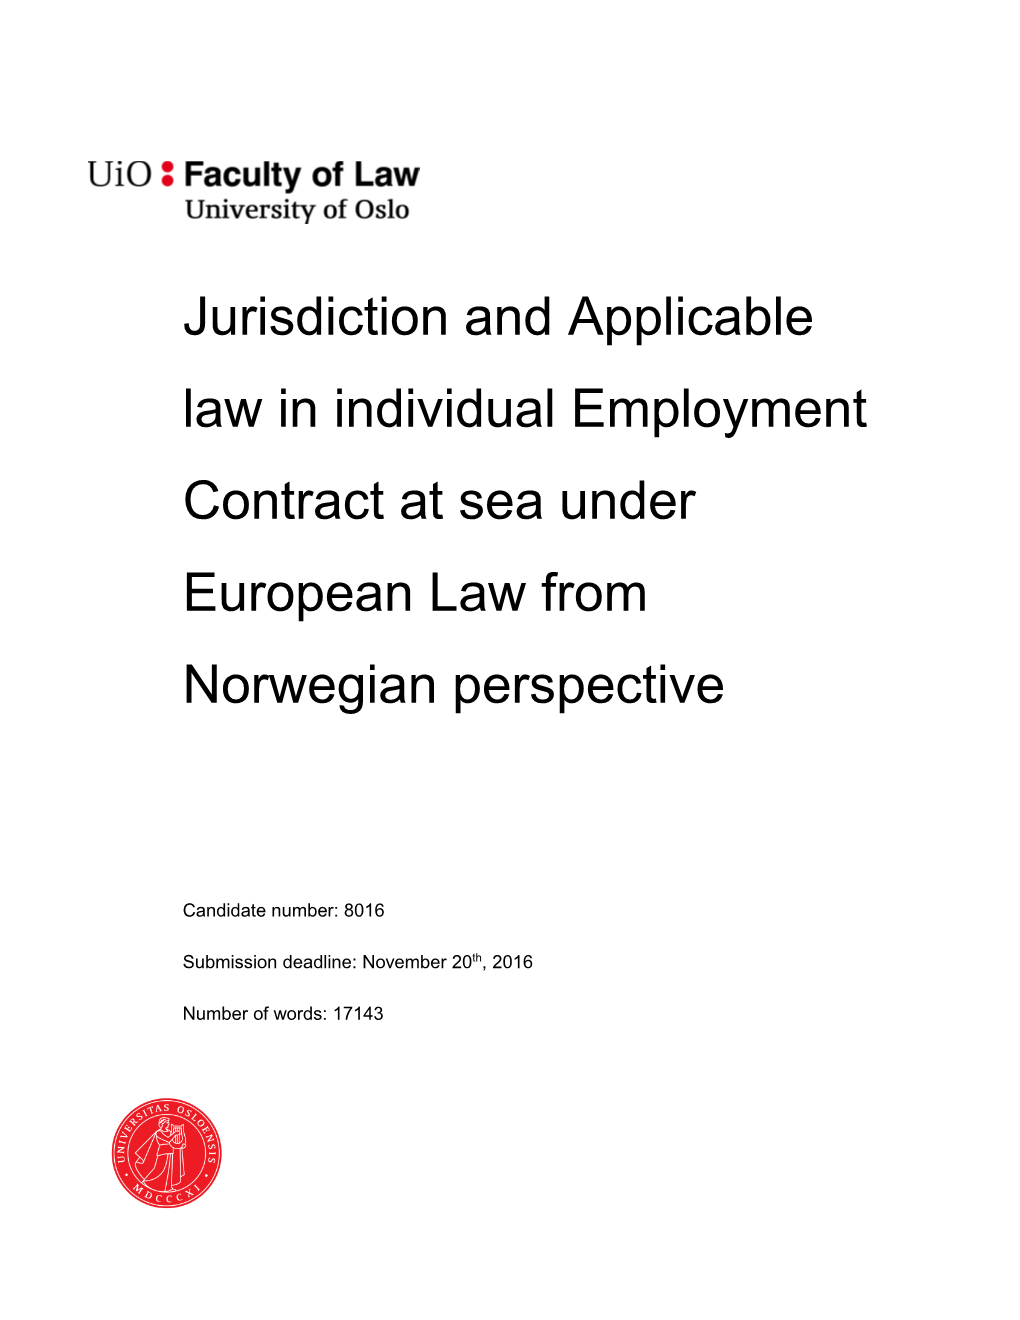 Jurisdiction and Applicable Law in Individual Employment Contract at Sea Under European Law from Norwegian Perspective